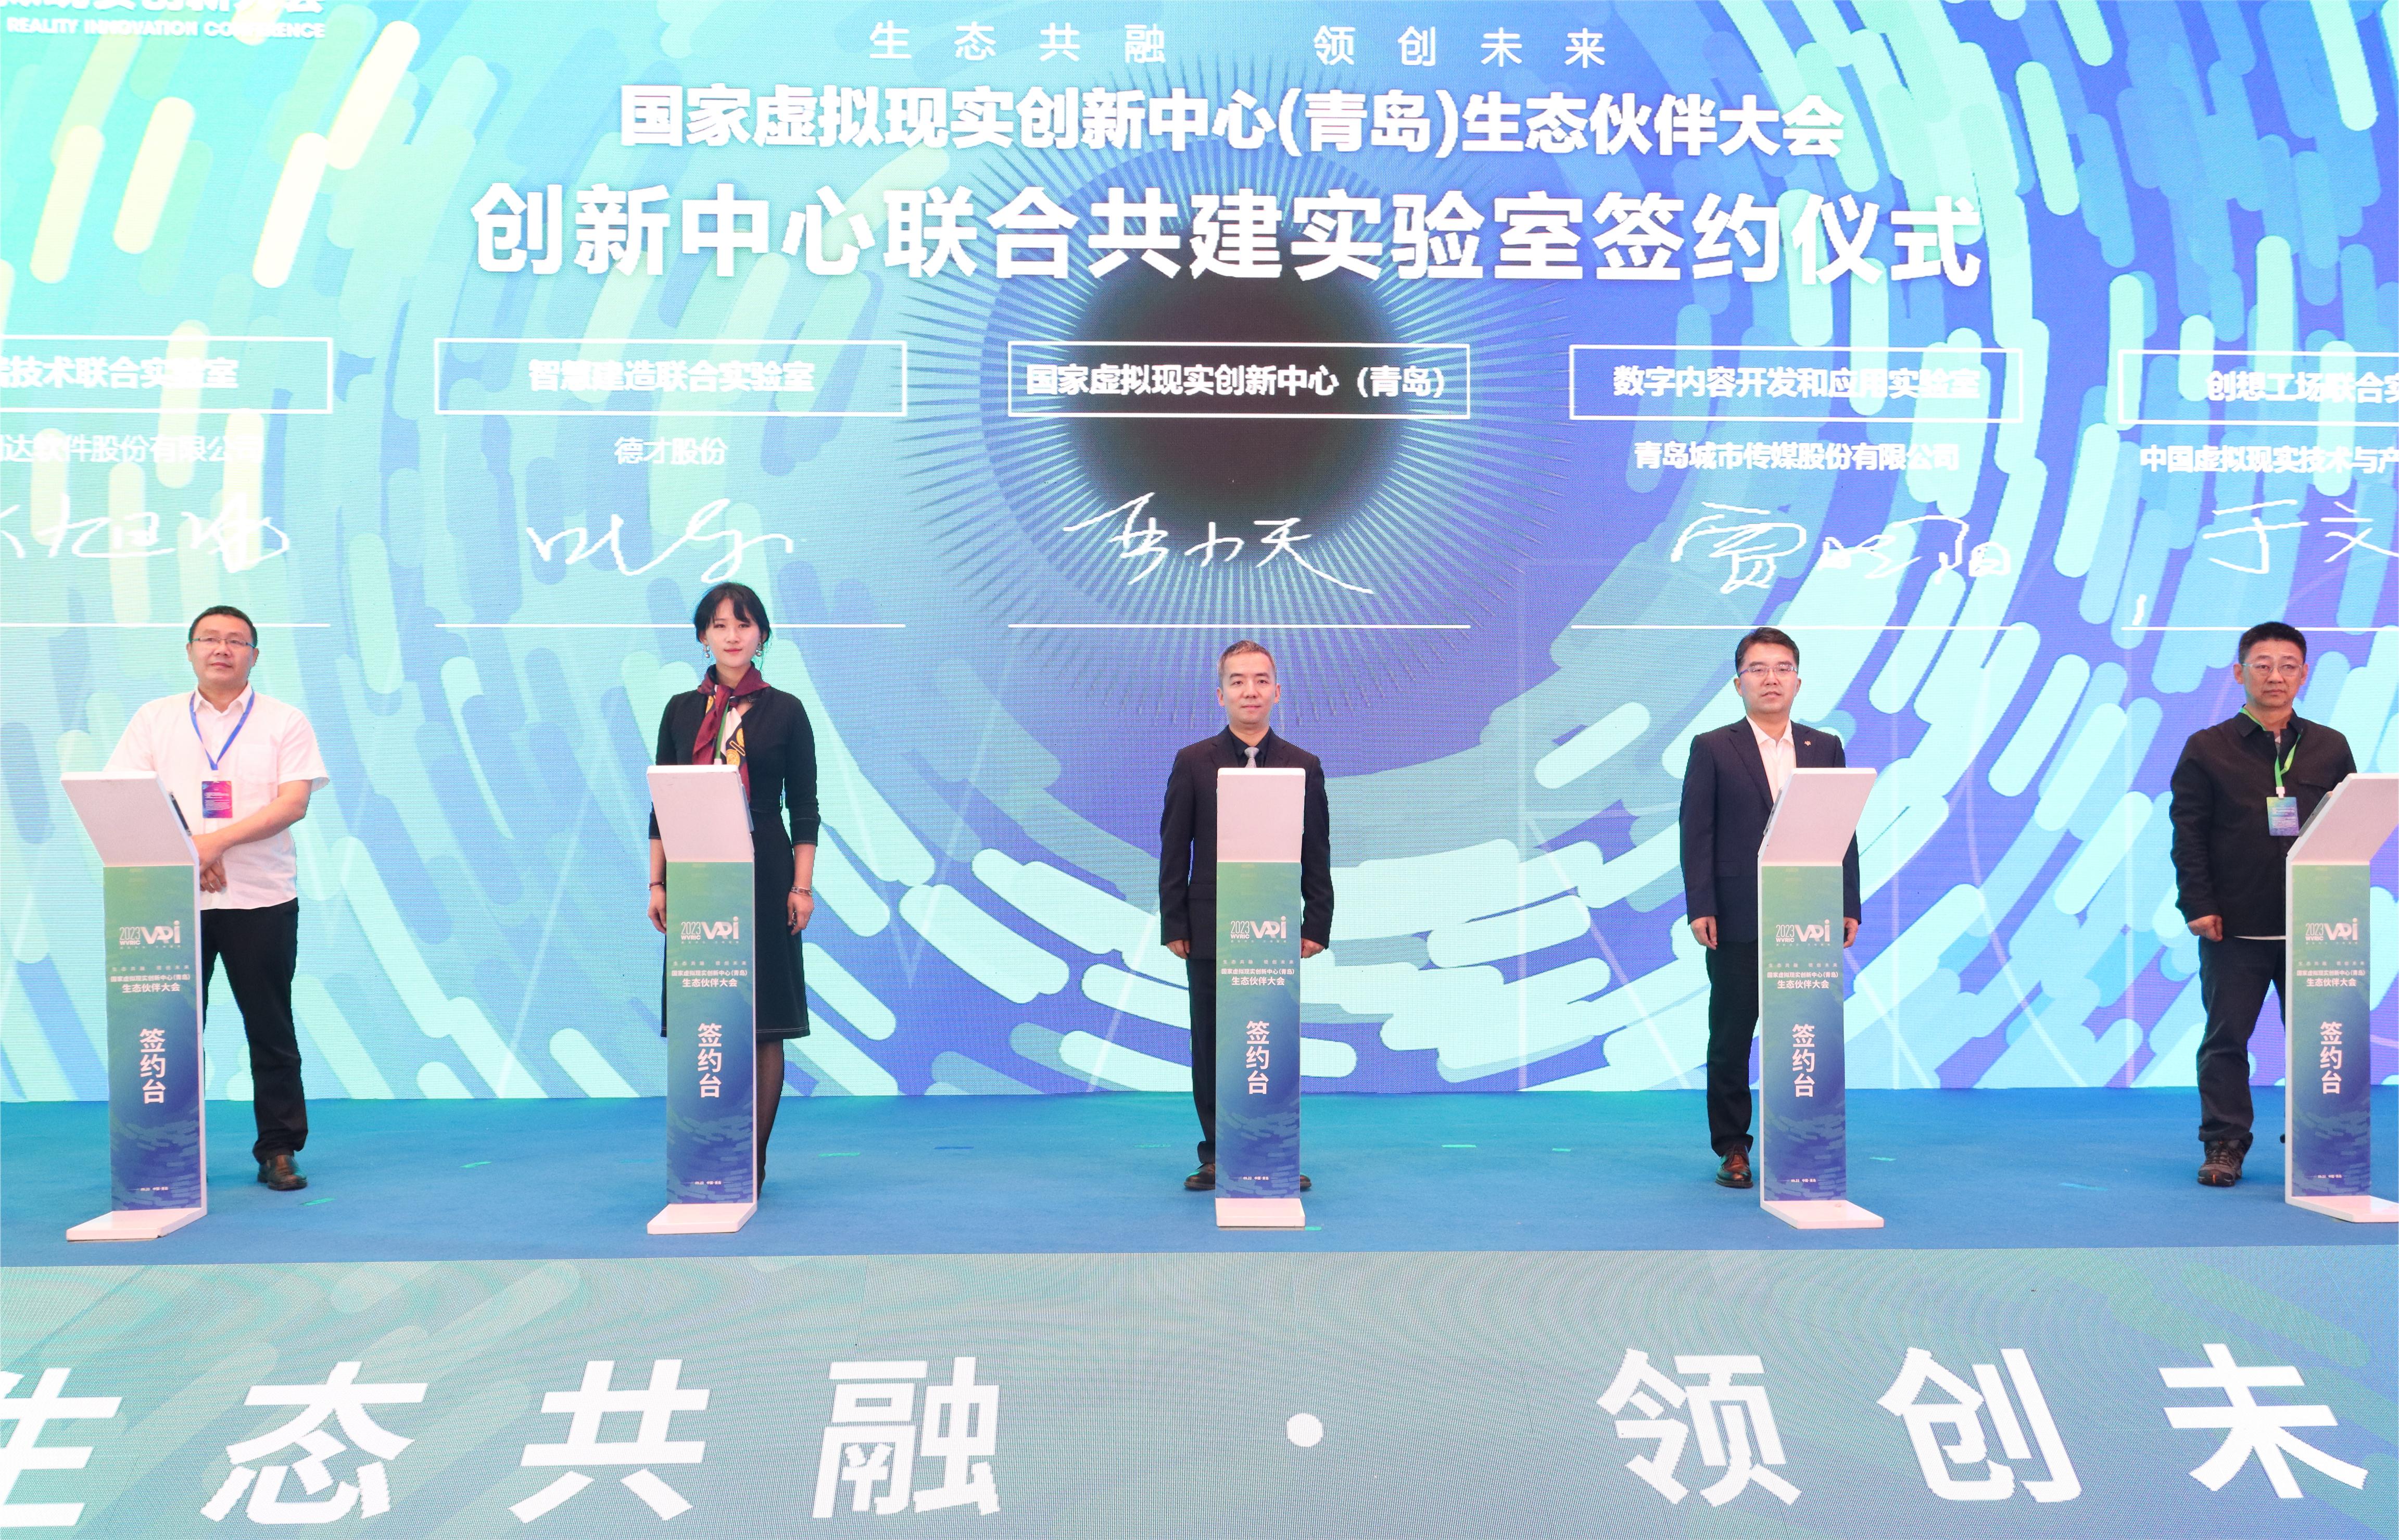 Decai attended the National Virtual Reality Innovation Center (Qingdao) Eco-partner conference